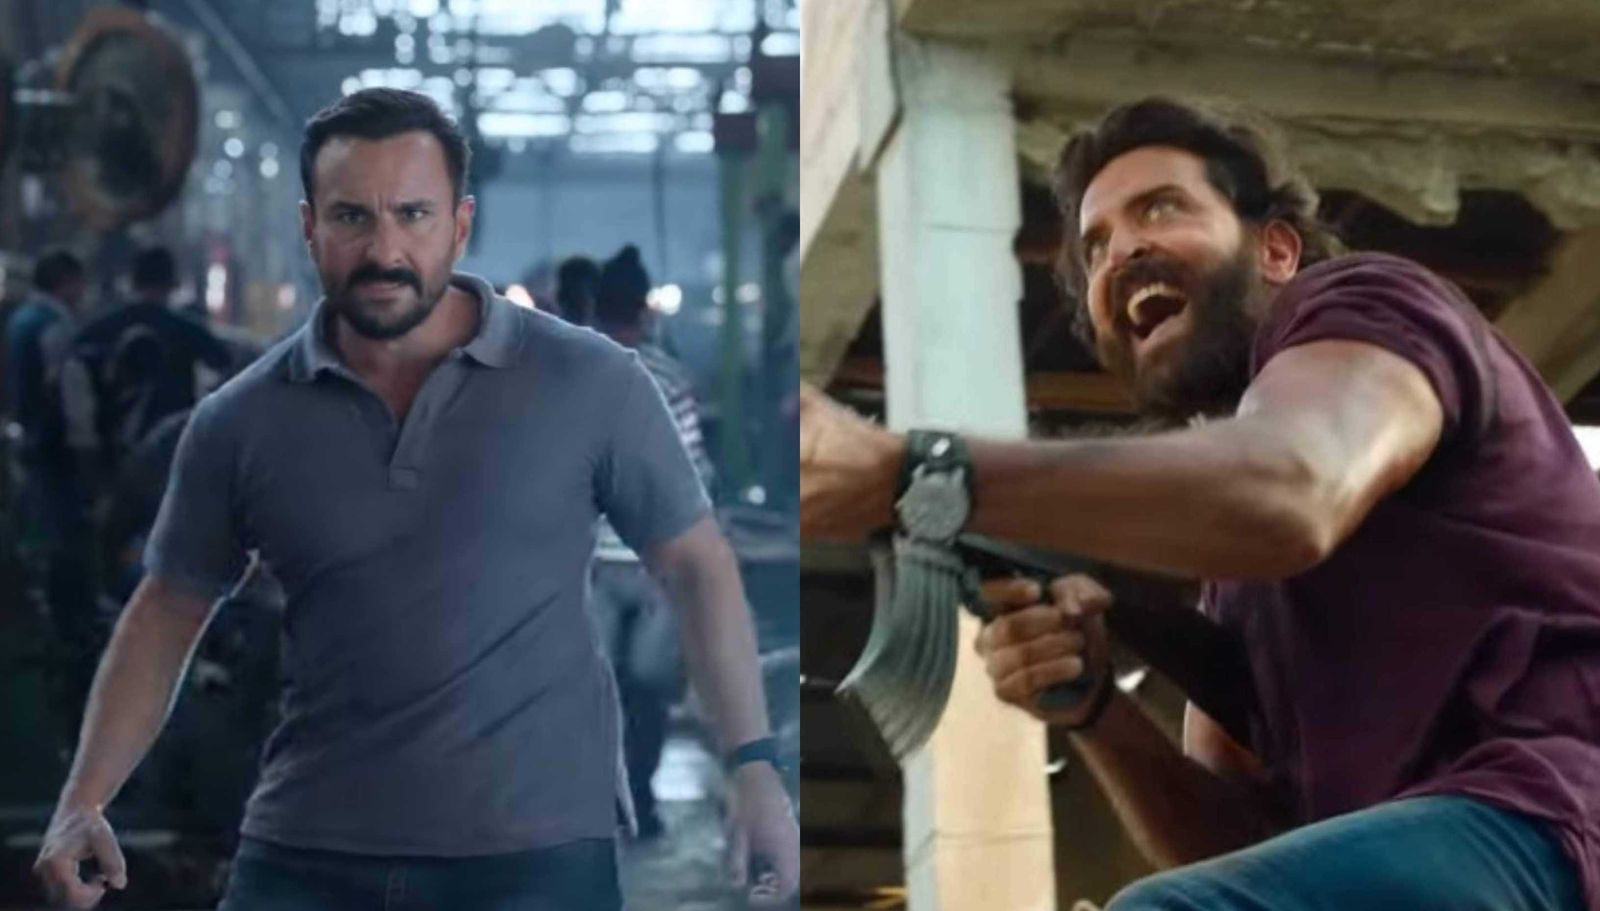 Vikram Vedha: Saif Ali Khan is not even charging half of what Hrithik Roshan is taking home? Here’s what we know